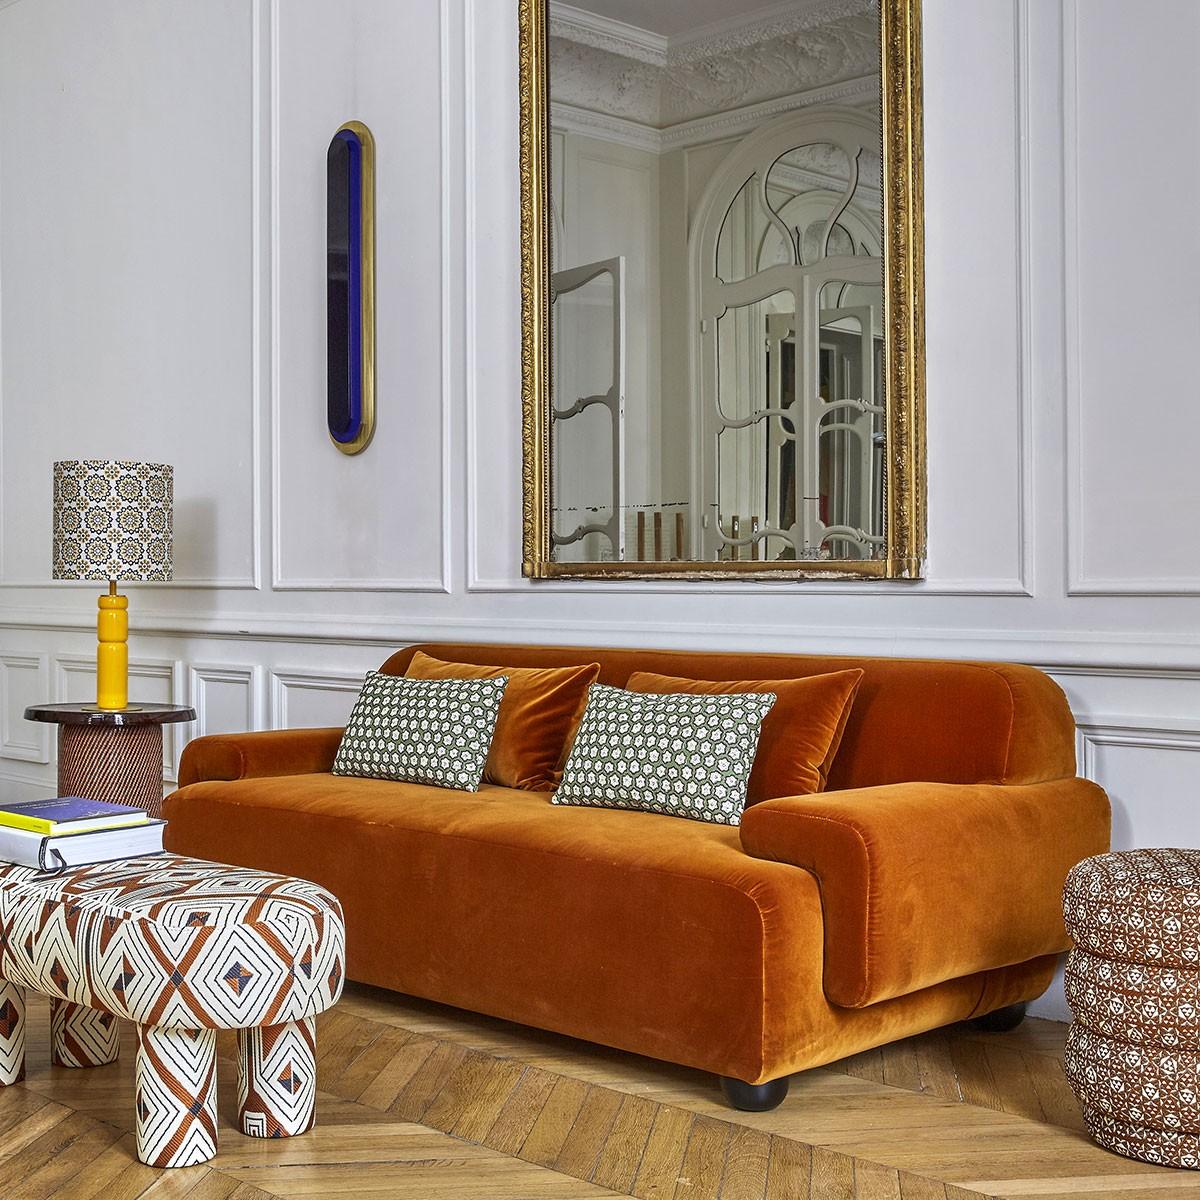 Popus Editions Lena 3 Seater Sofa in Vermilion Como Velvet Upholstery

It looks like it's straight out of a movie, with its generous curves and wide armrests. It is a real invitation to spend long Sundays with the family, comfortably seated in